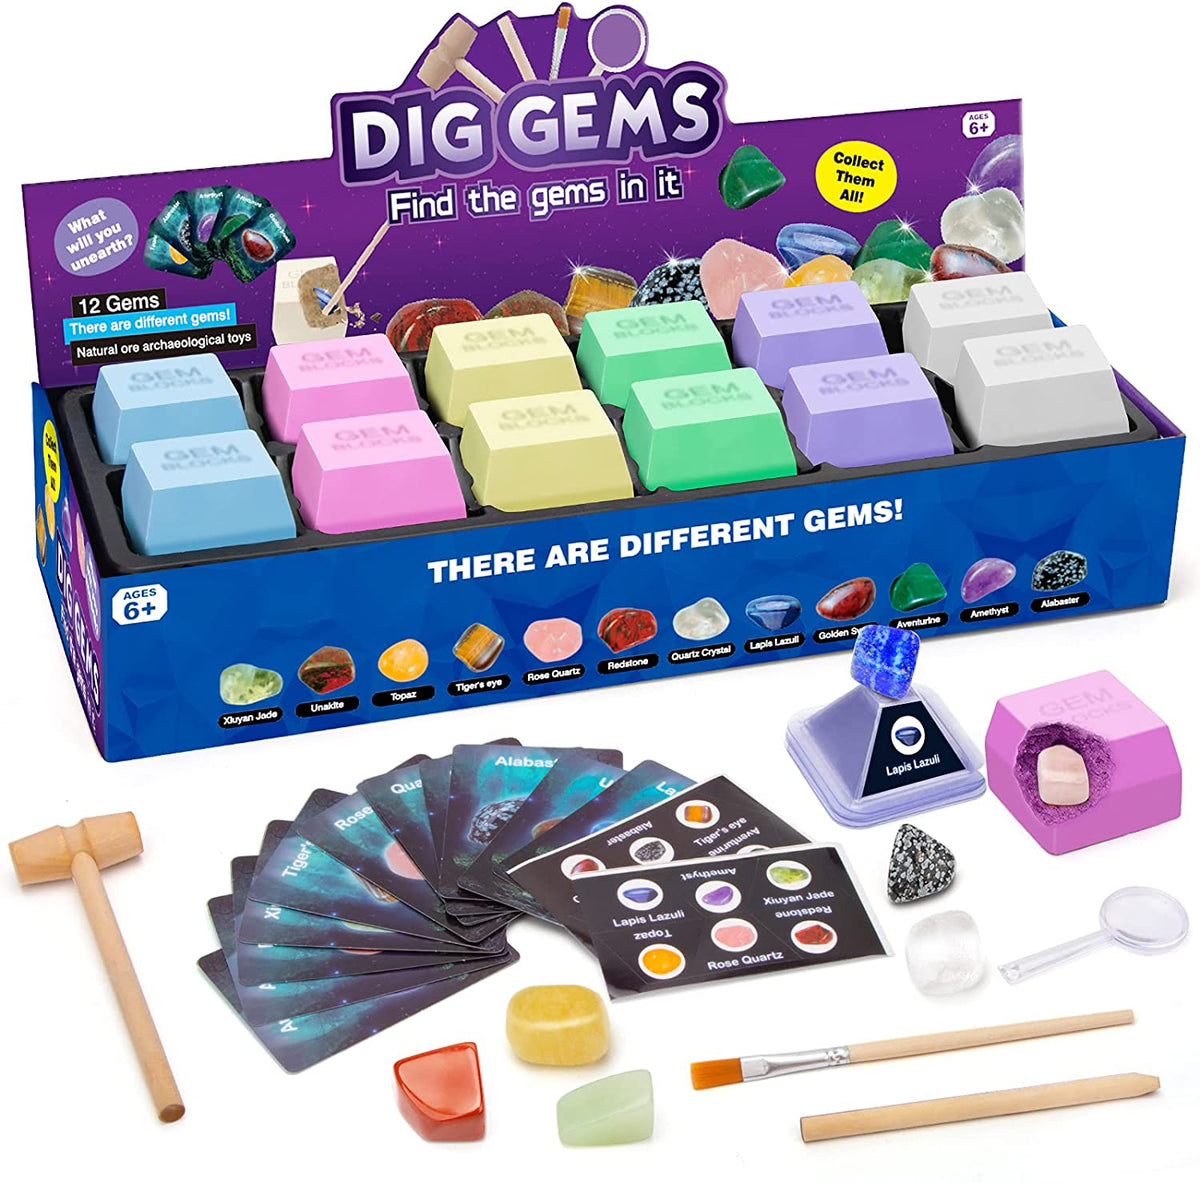  Gemstone Dig Kit (Unique Shape),Great STEM Science Kit for  Kids- Excavate Your Own 12 Real Gemstones,Educational DIY Toys,Gem Digging  Kit,Archaeology Geology Gifts for Boys & Girls Ages 6+ : Toys 